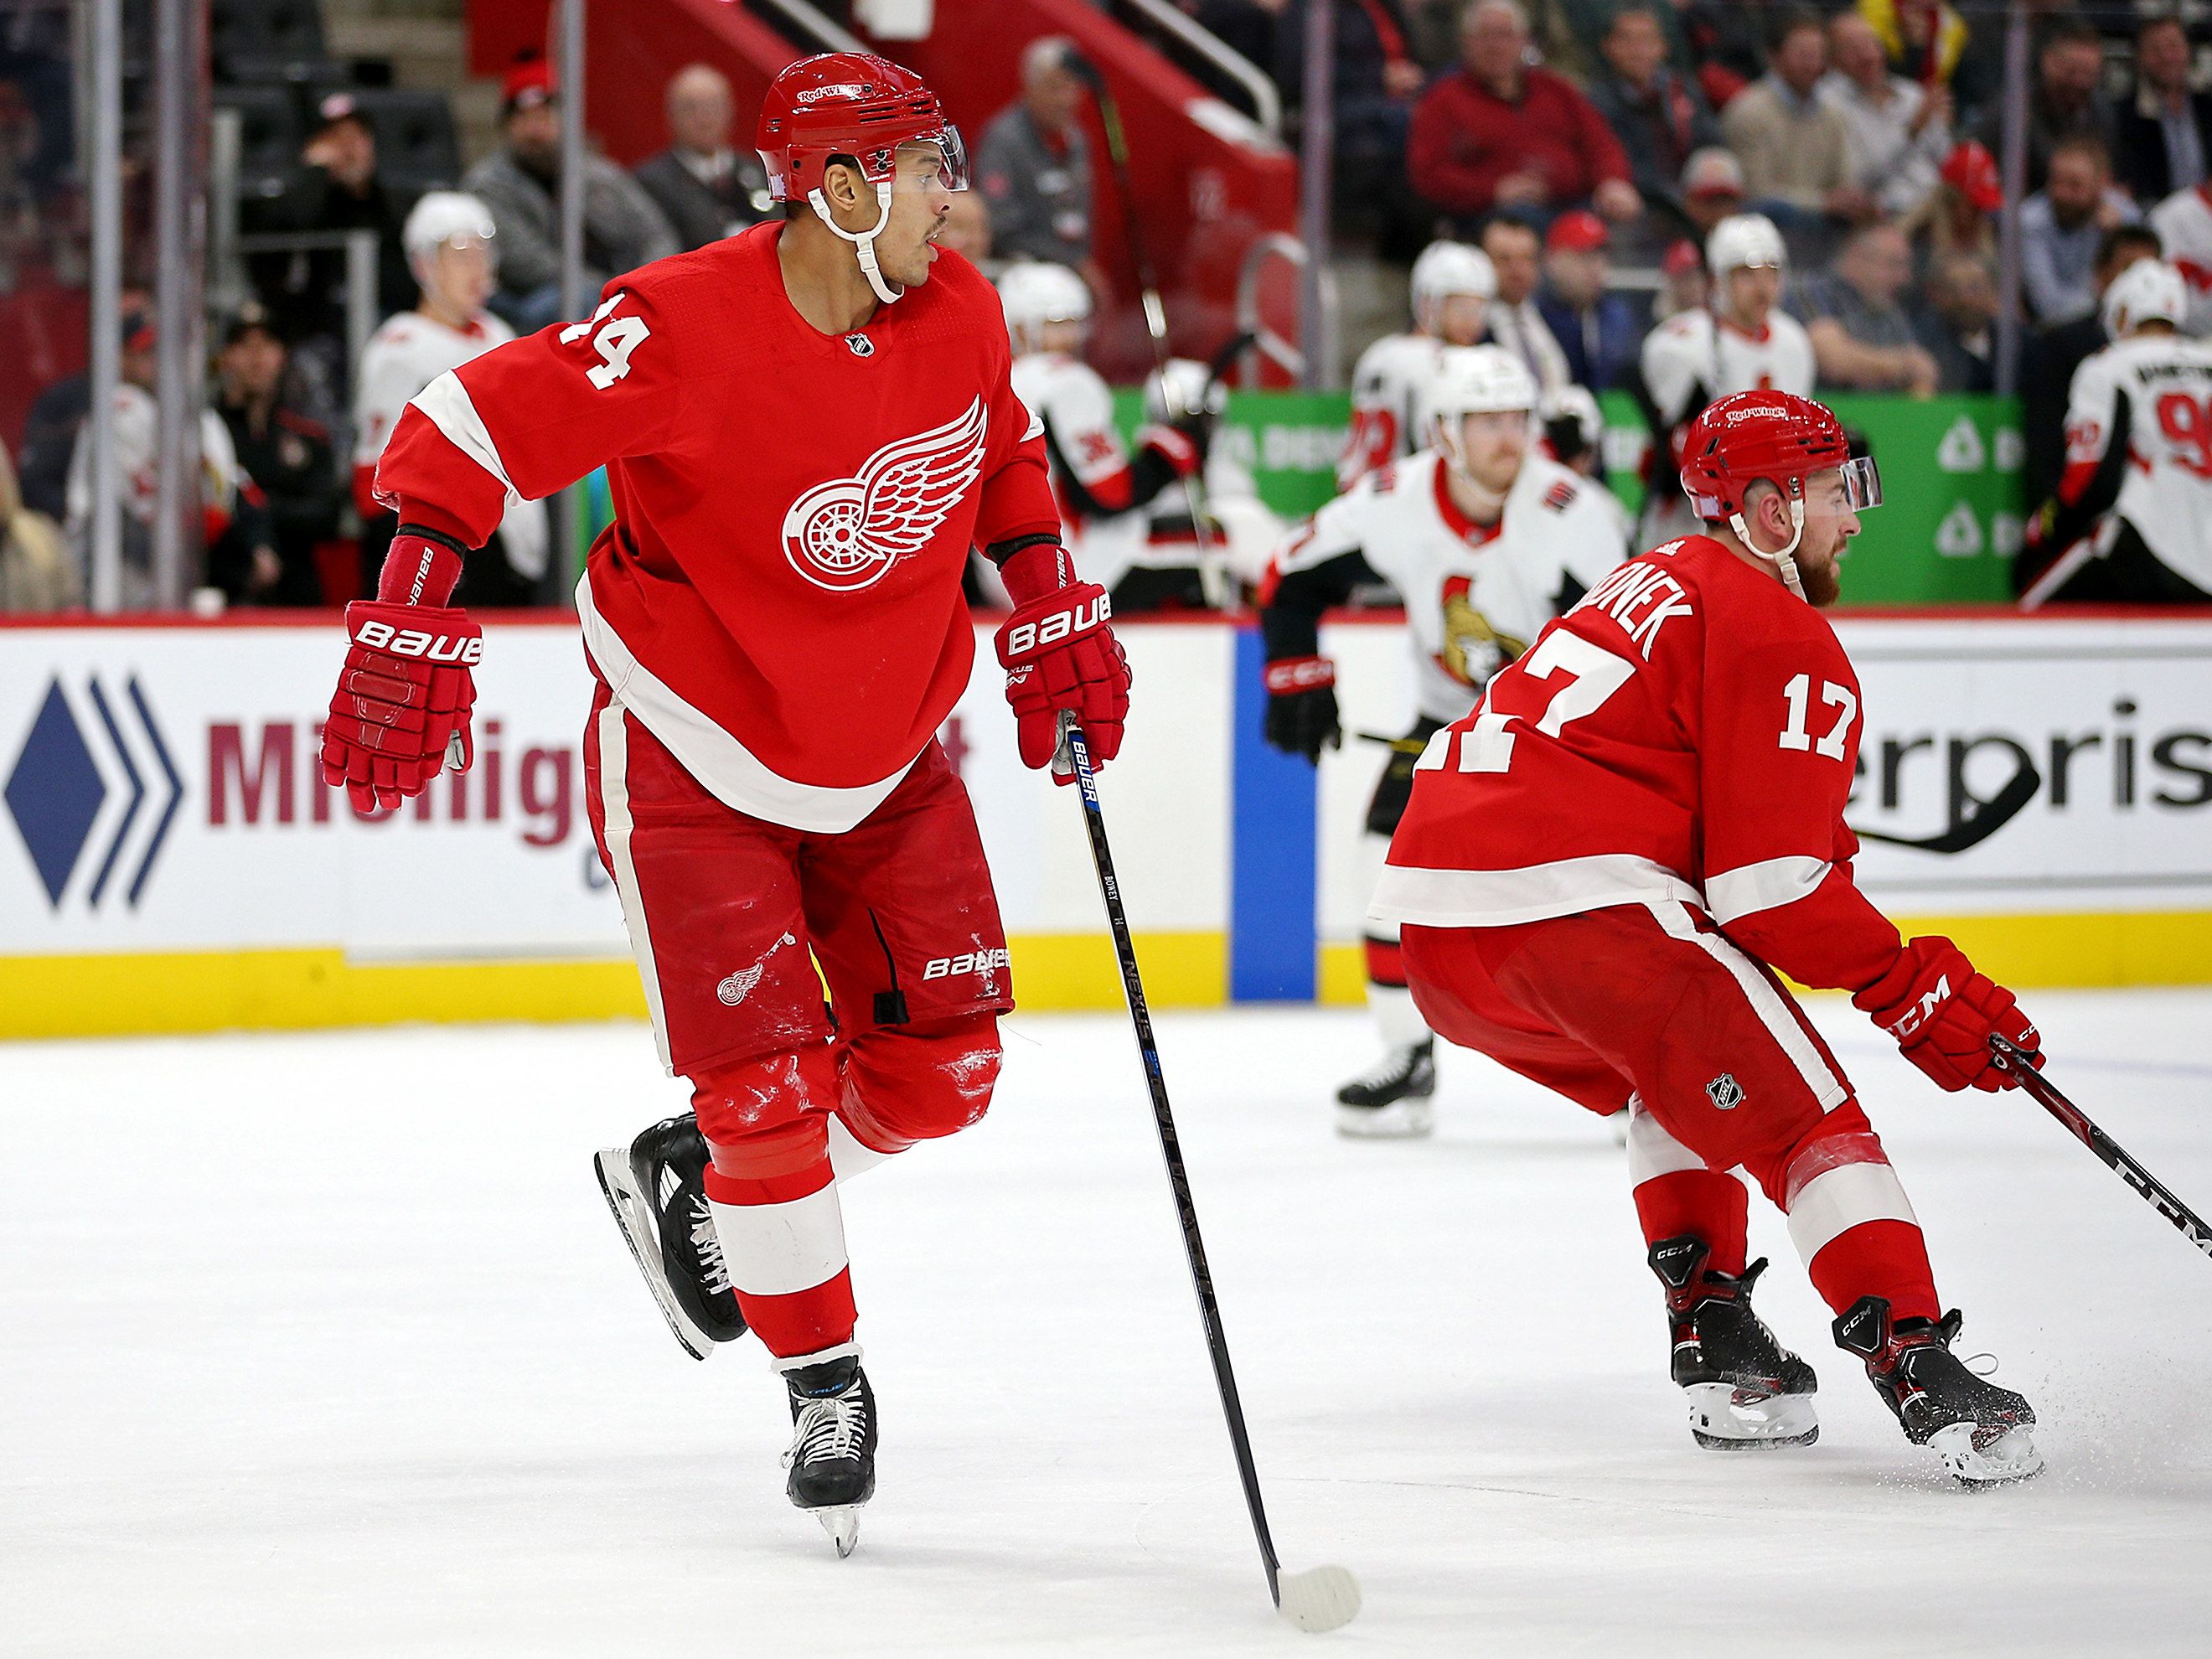 Watch Detroit Red Wings at Ottawa Senators: Stream NHL live - How to Watch  and Stream Major League & College Sports - Sports Illustrated.